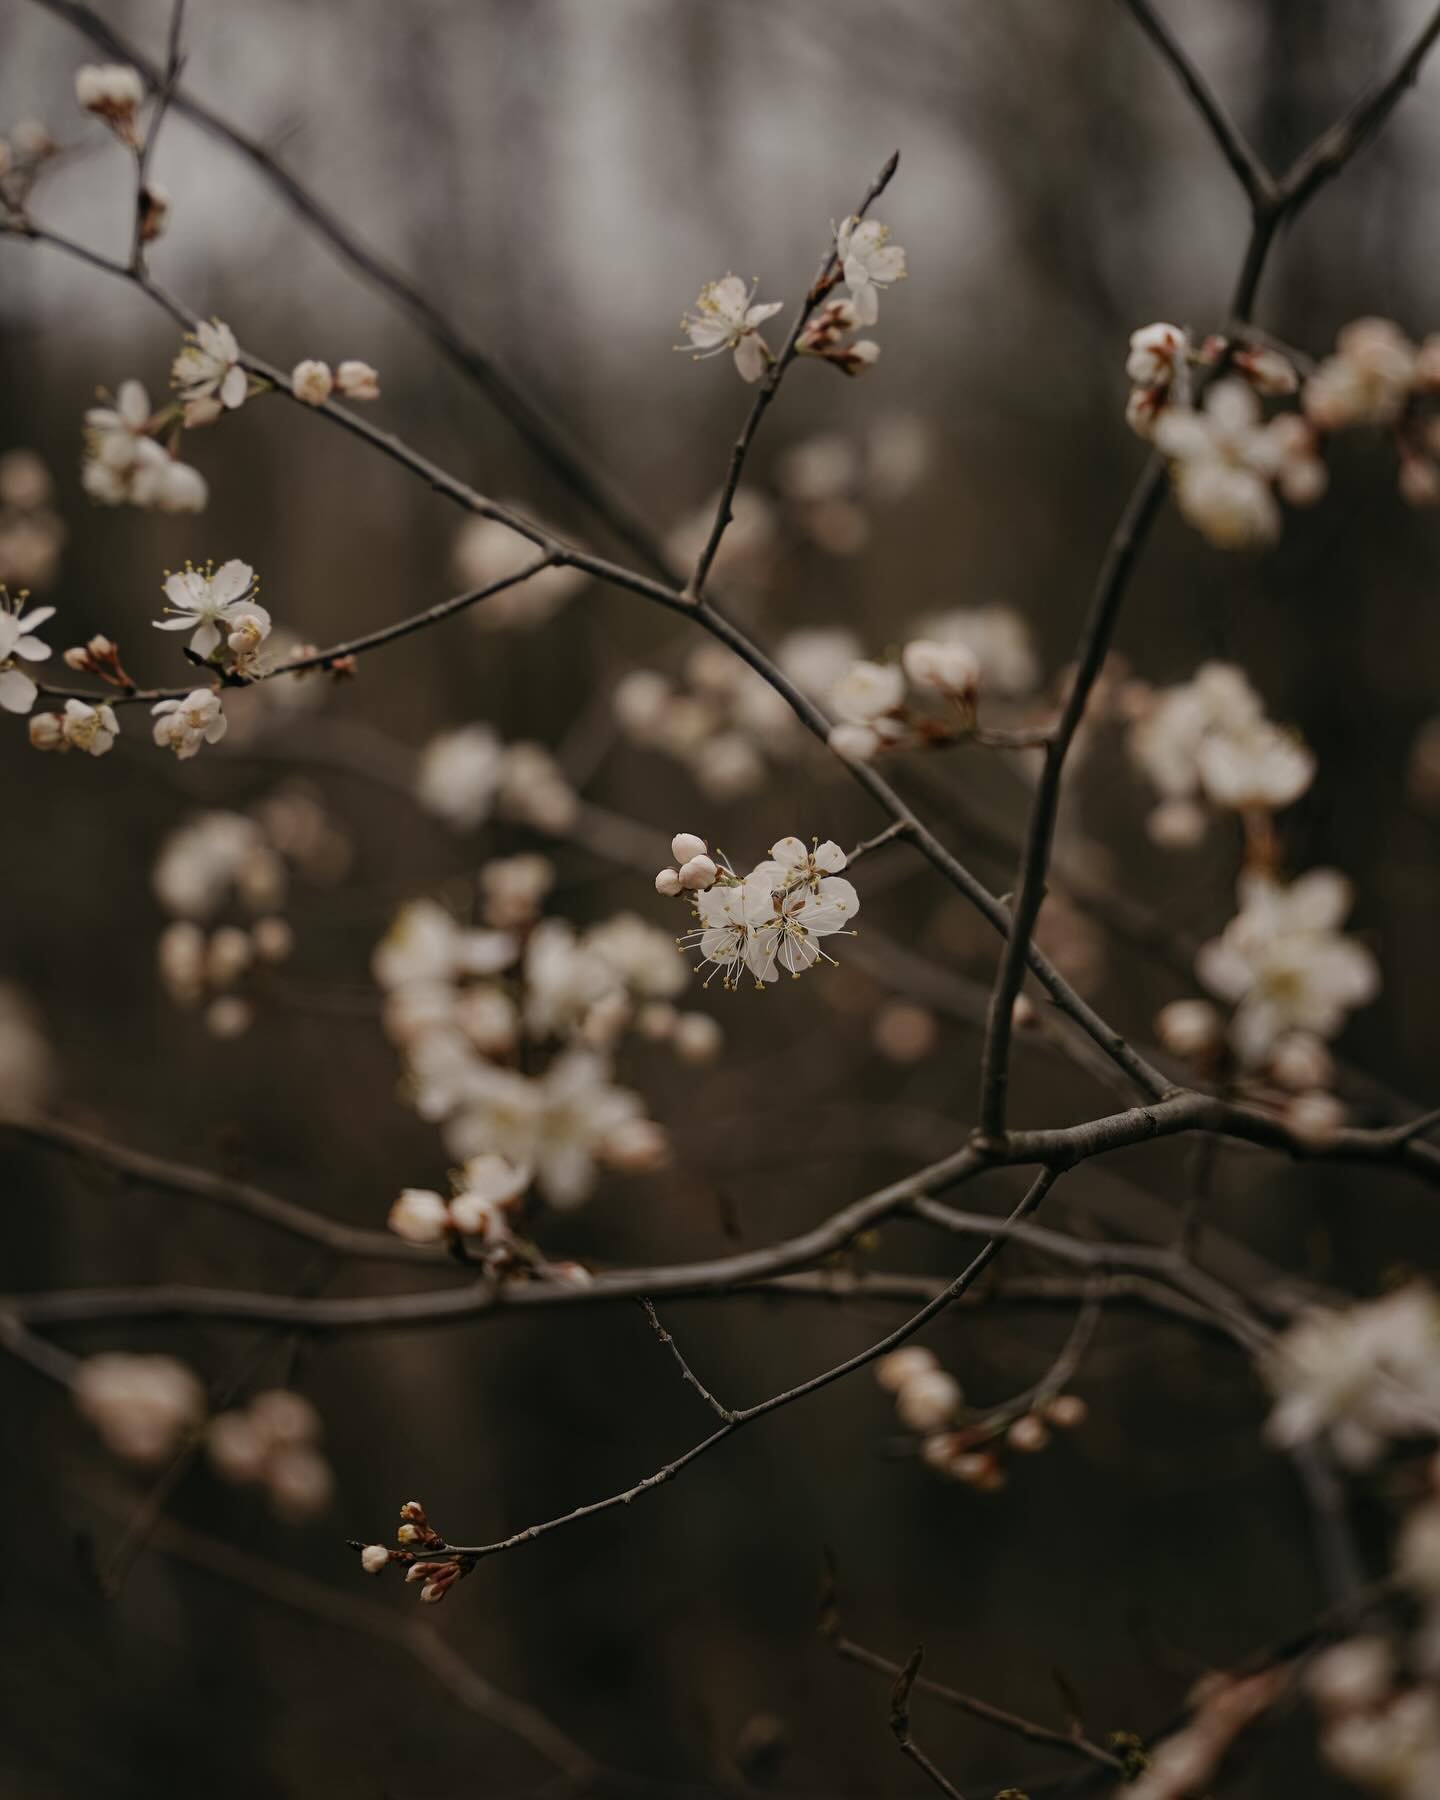 matters of the heart | turning my attention towards + giving my presence to what is of the utmost importance. #springishere #springblossoms #theartofnoticing